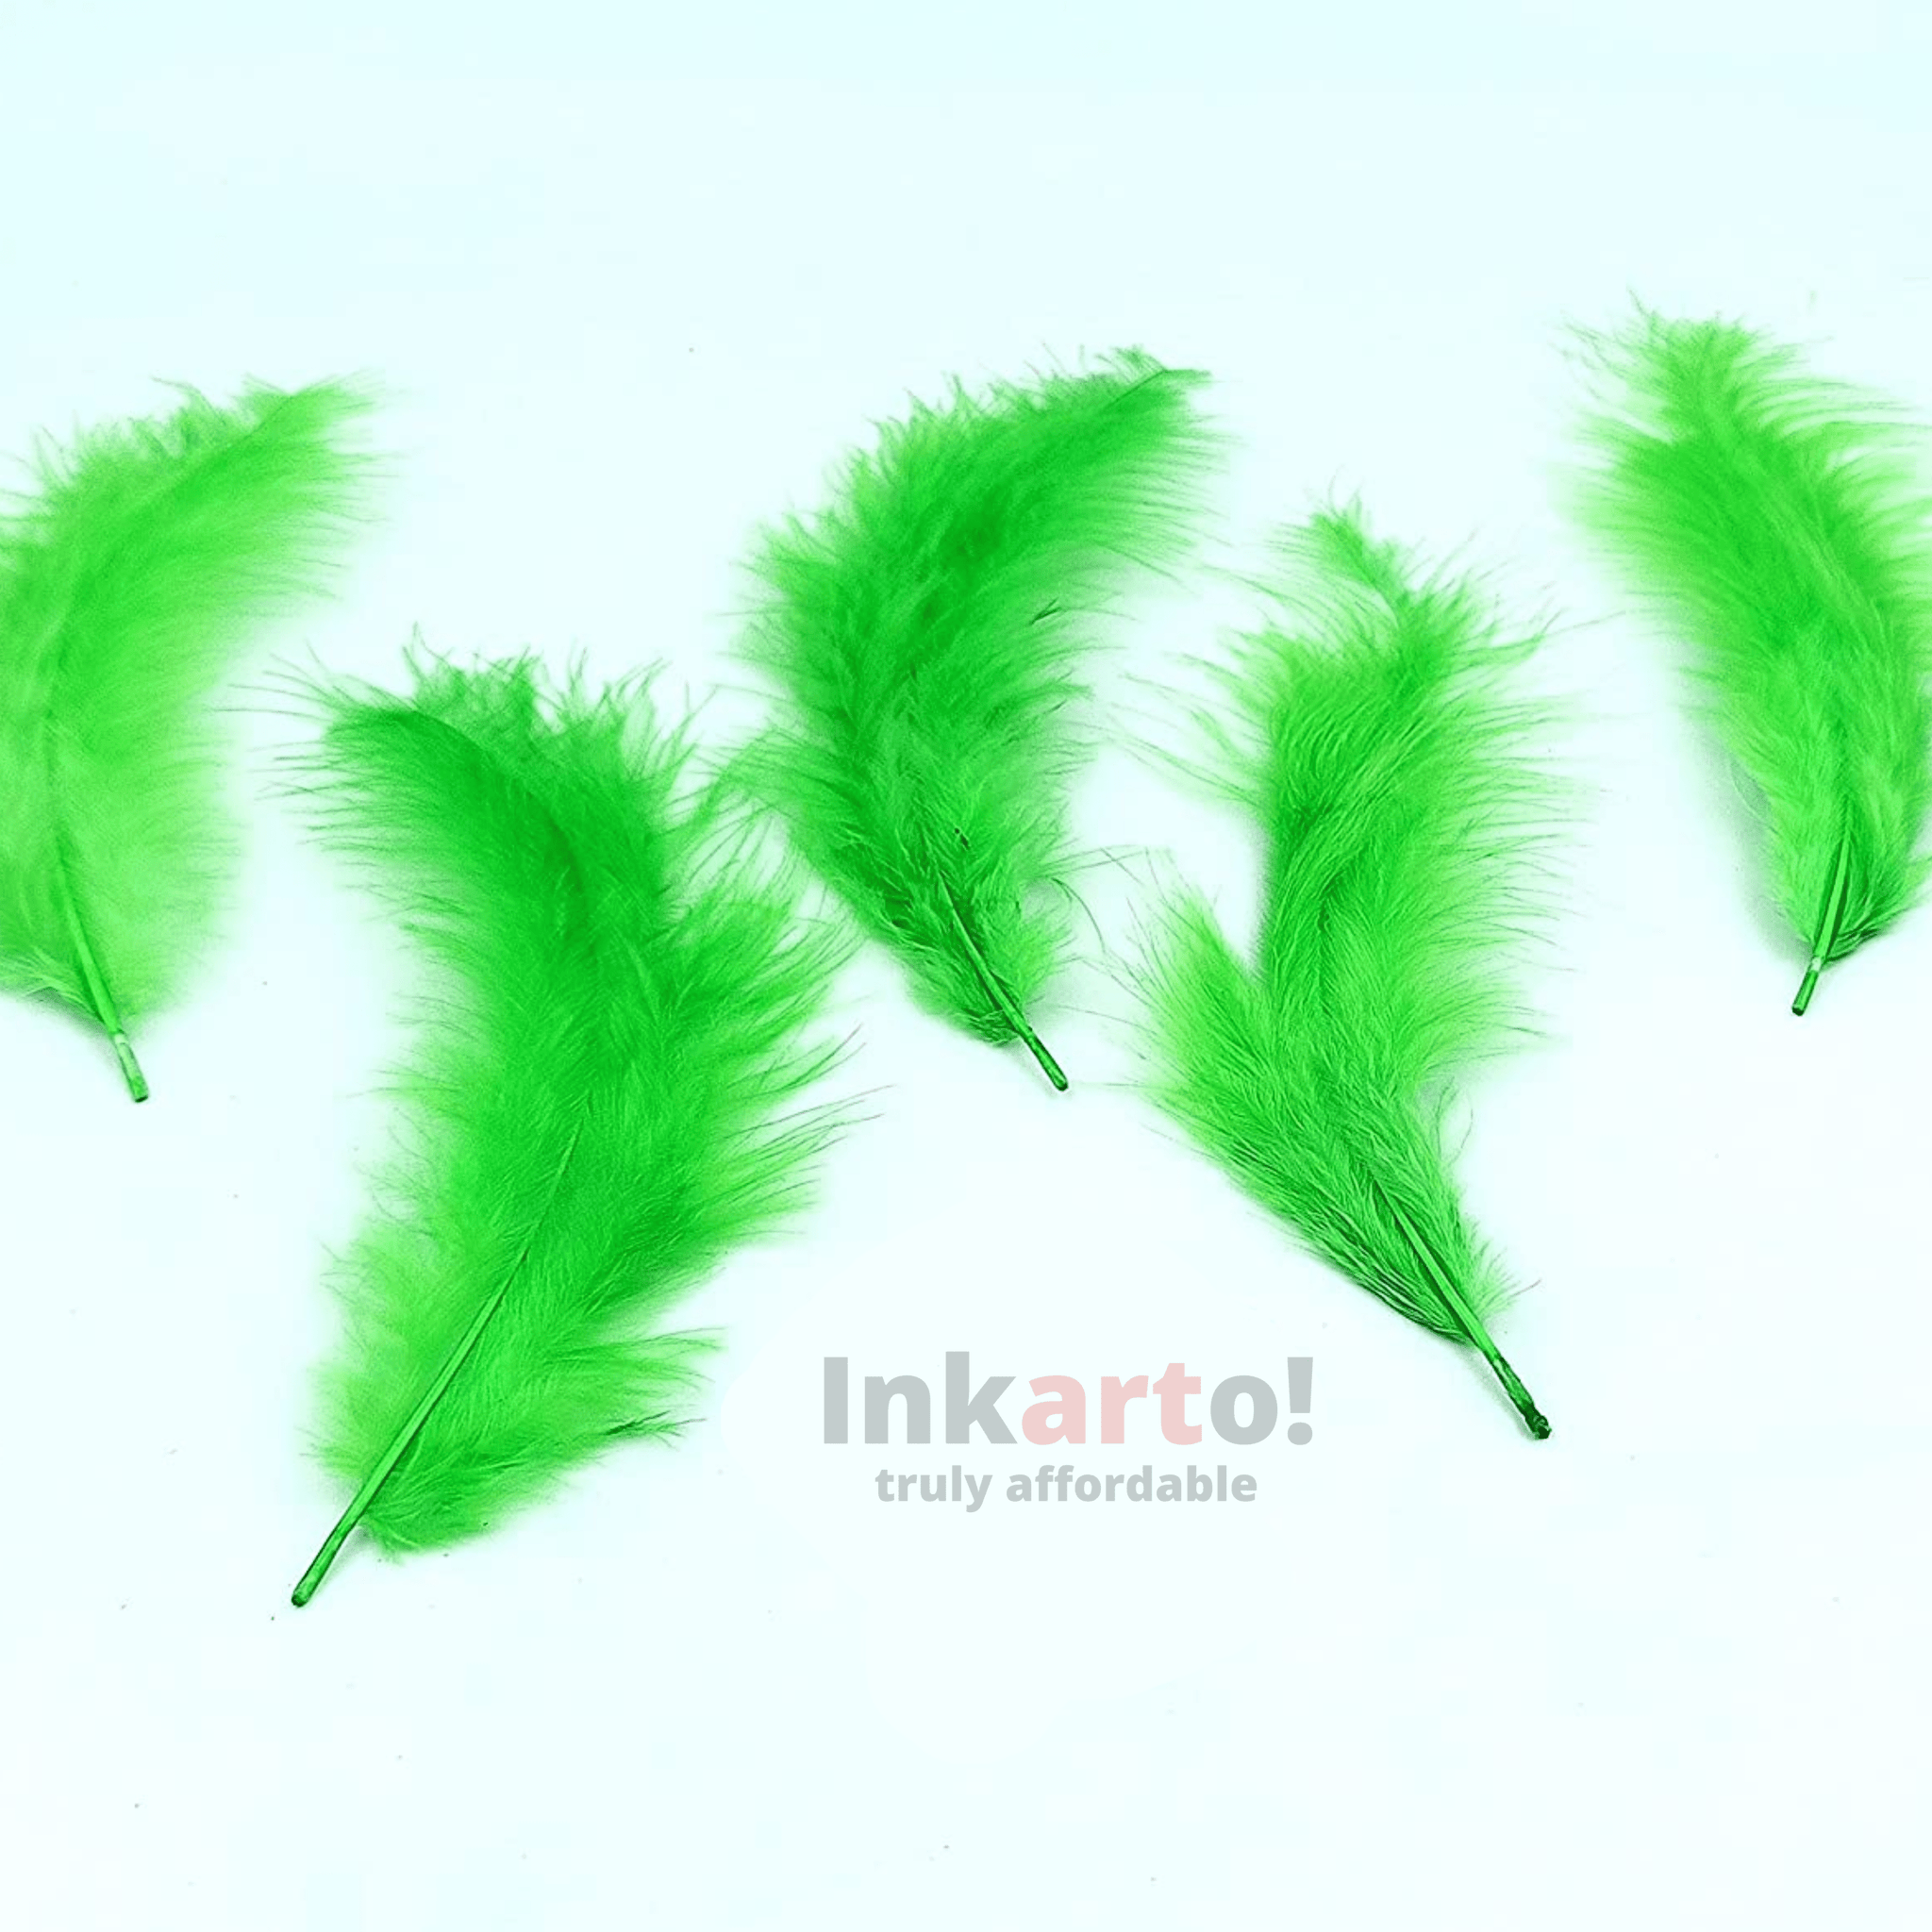 Soarer 300pcs Green Feathers for Crafts - 3-5inch Feathers Bulk for Wedding  Home Party, Dream Catcher Supplies and DIY Crafts(Green)